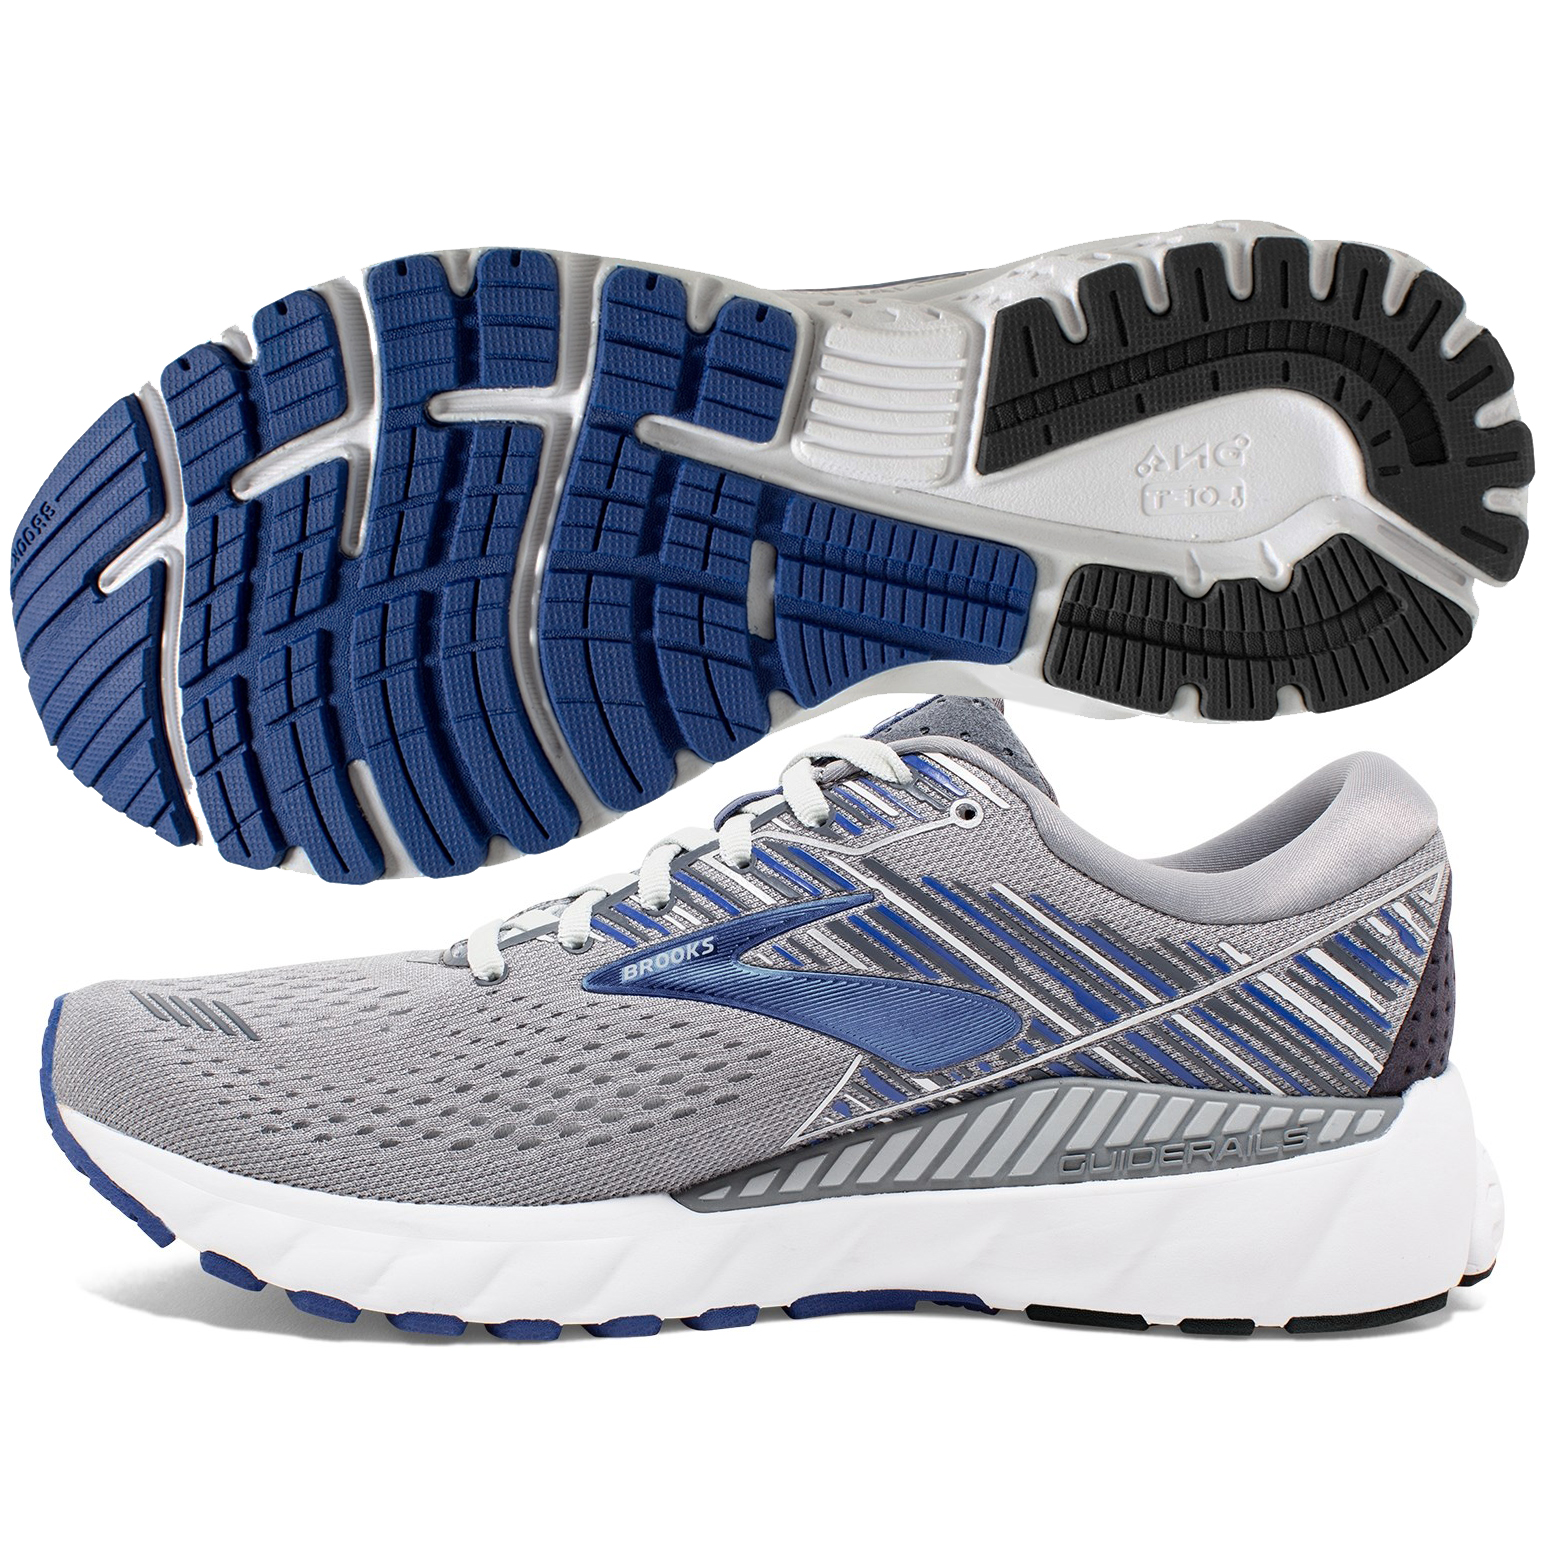 Brooks Adrenaline Gts 19 Size 12 Online Sale, UP TO 53% OFF